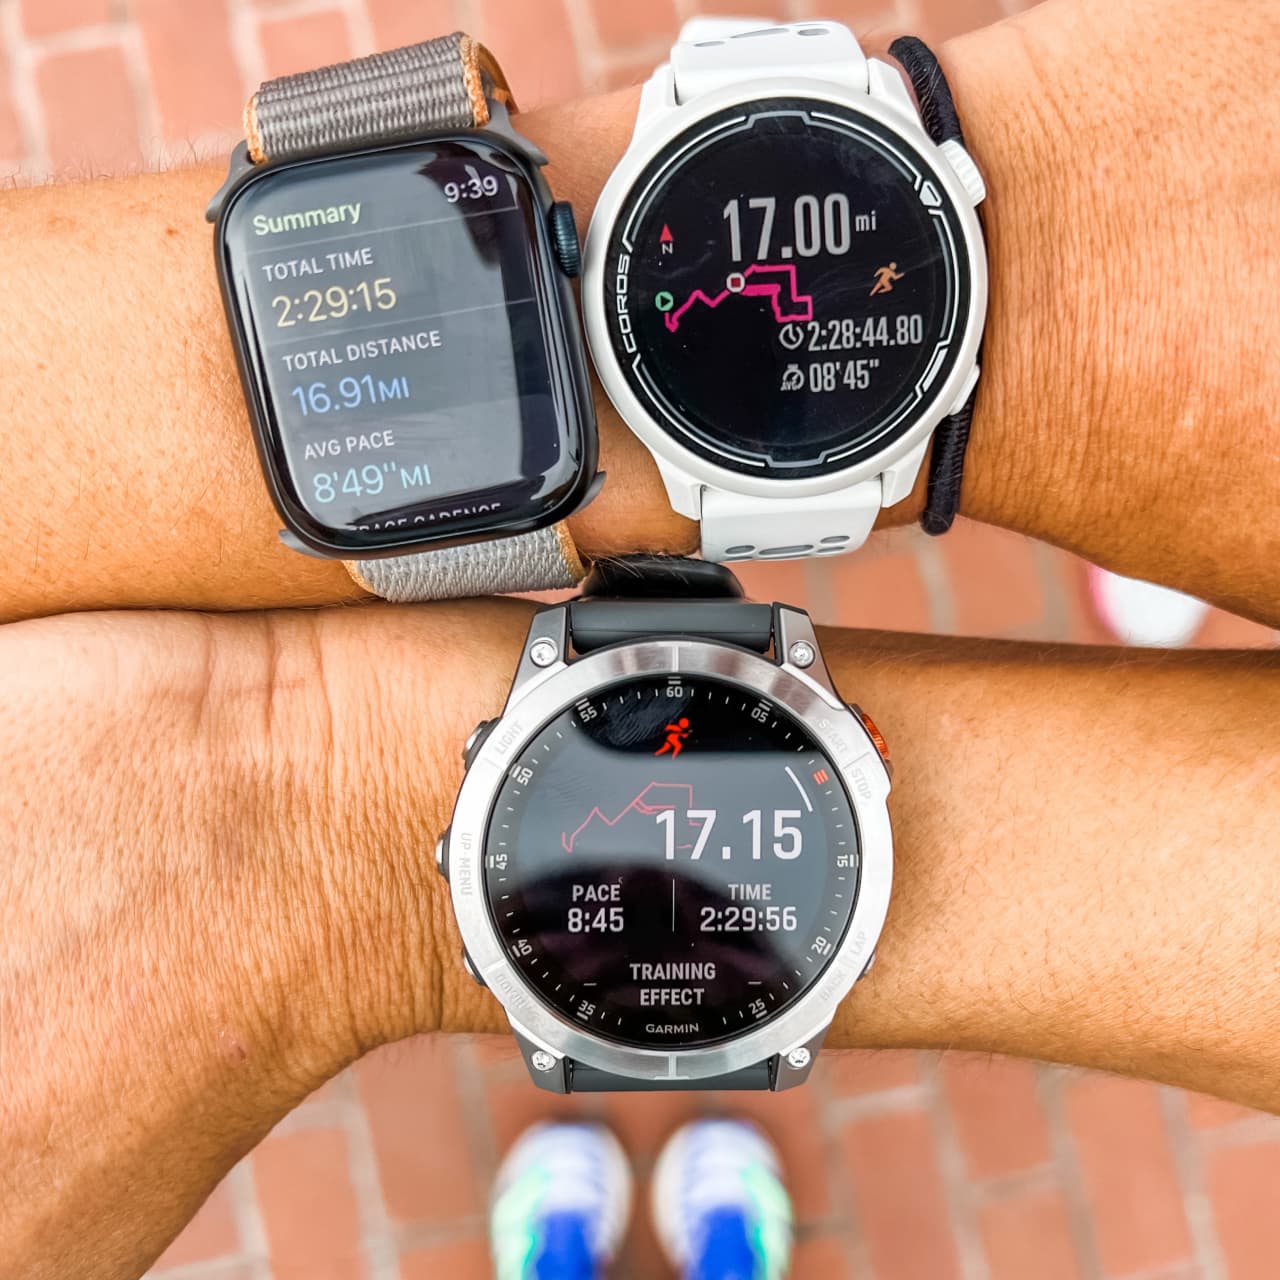 Our tester wore each tracker during various workout sessions that included runs, bike rides and yoga sessions, and also during back-to-back nights to collect sleep data.